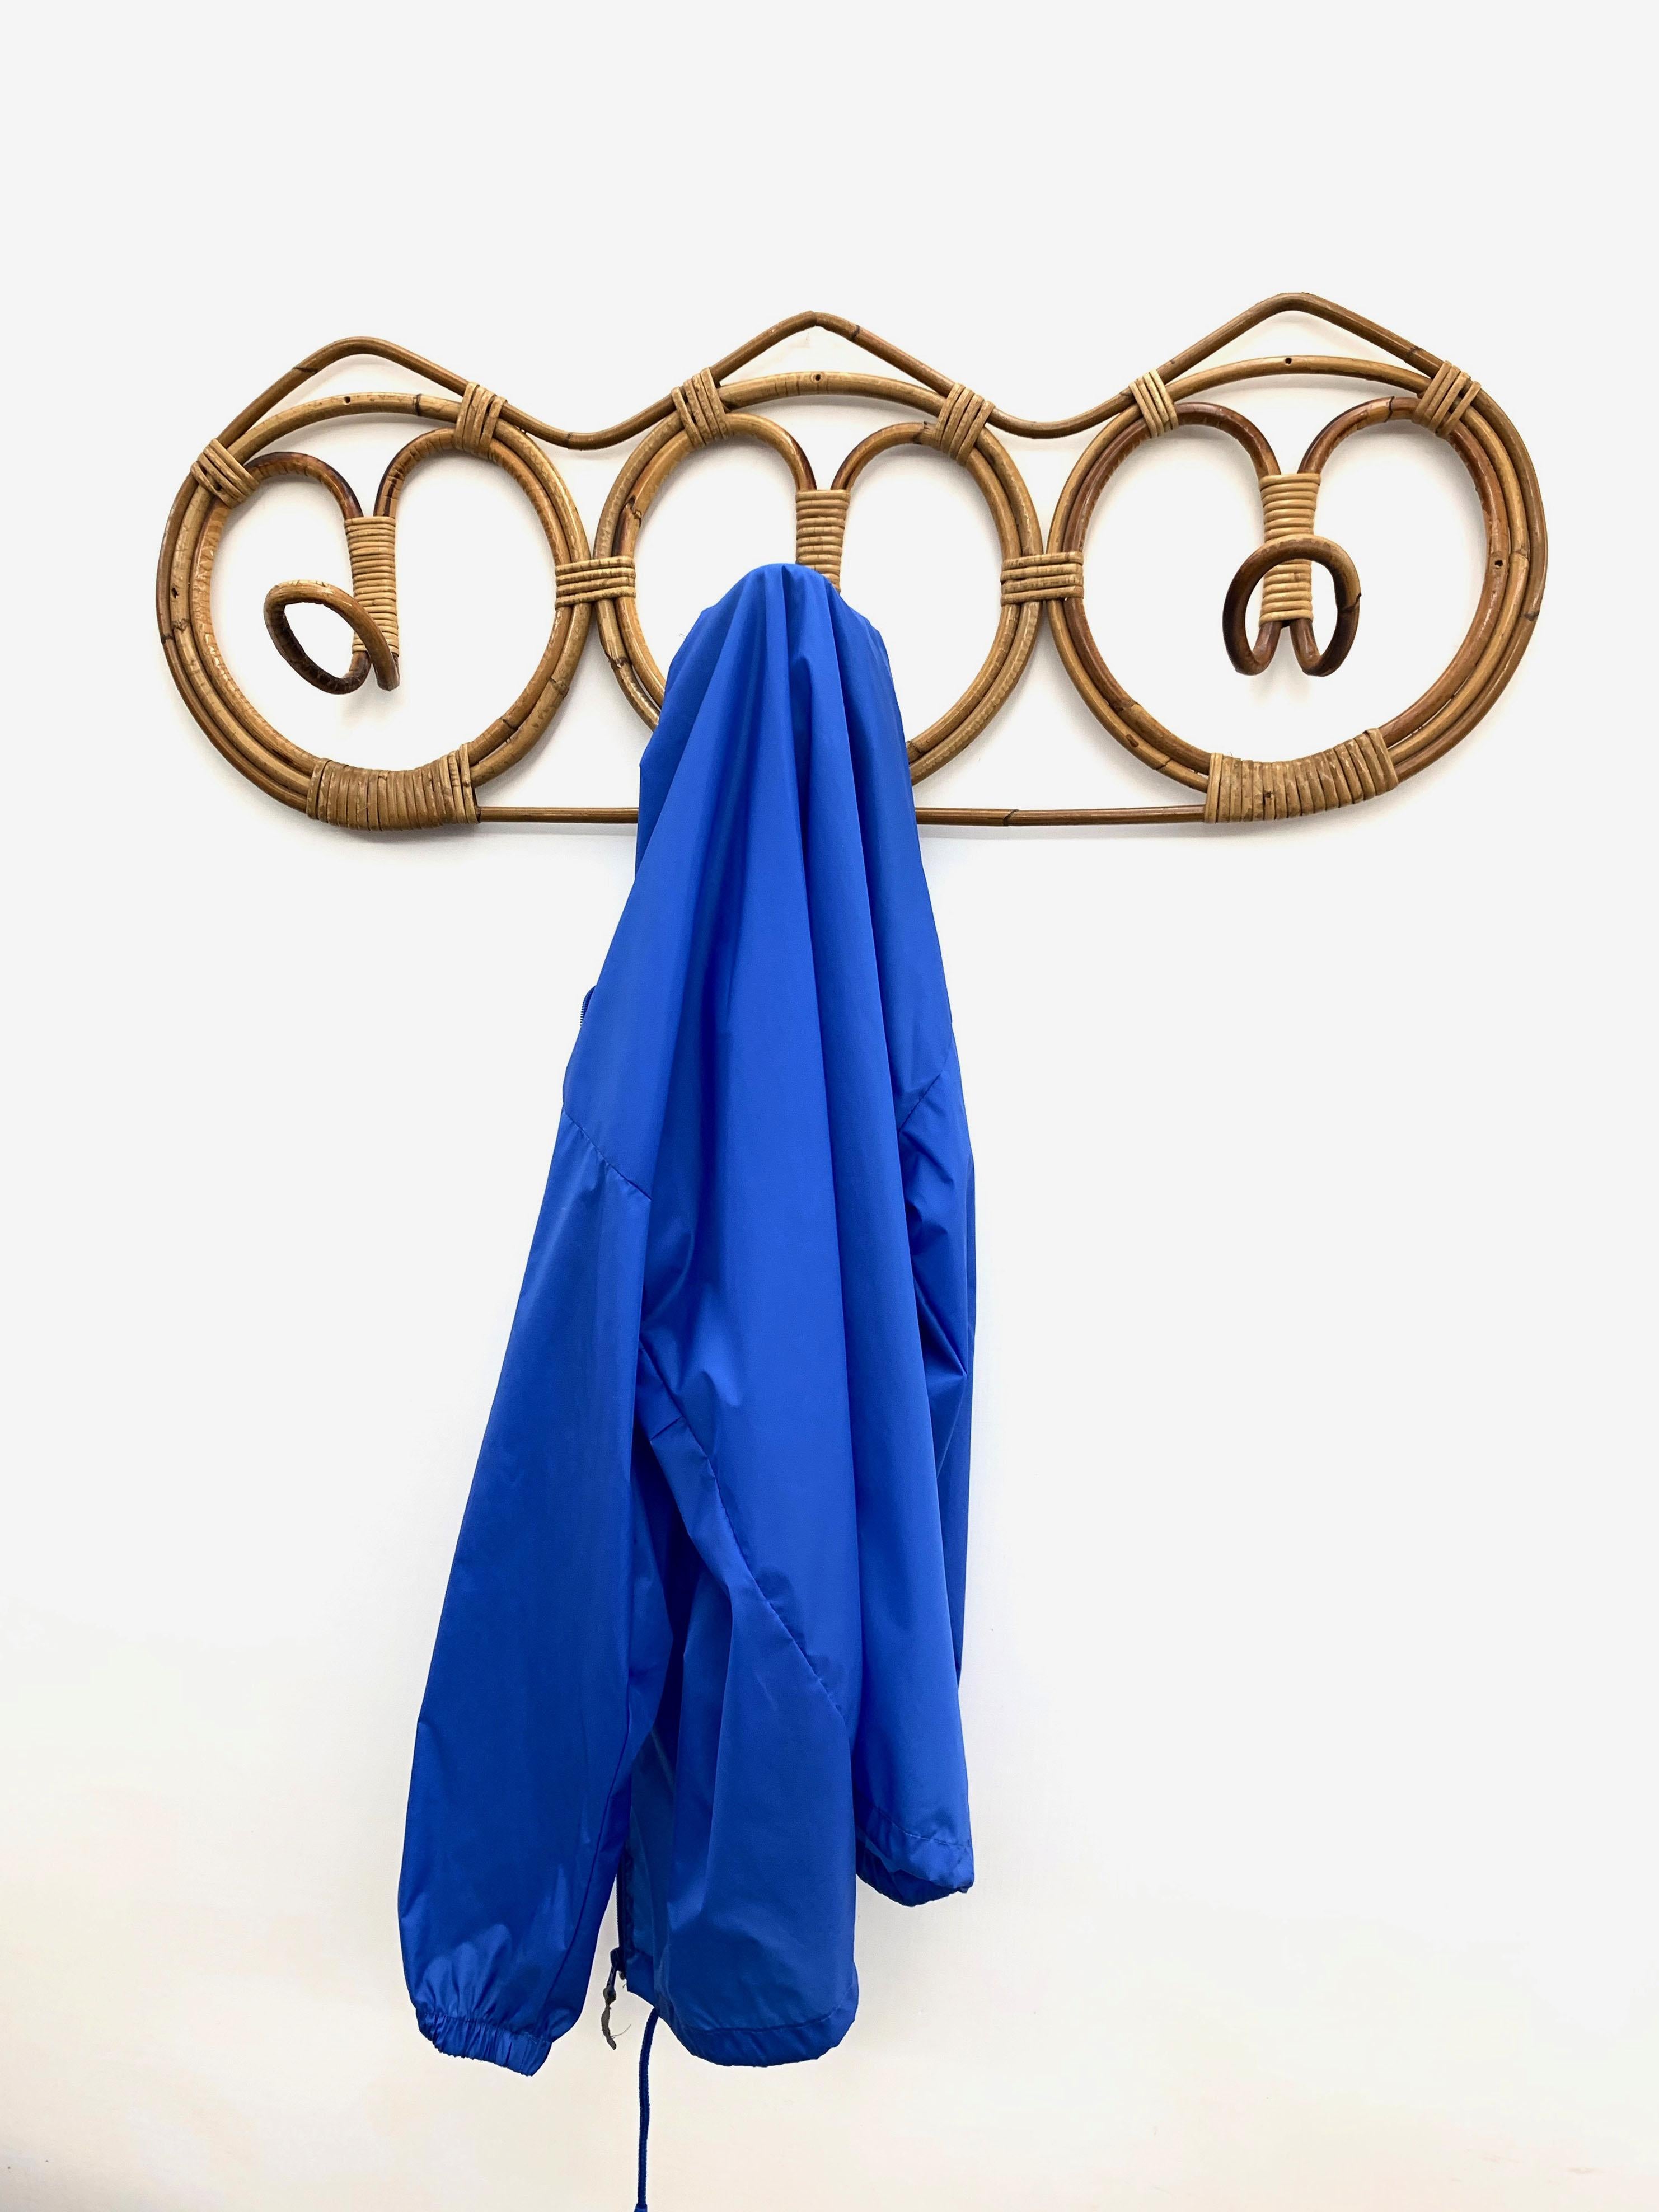 Midcentury Rattan and Bamboo Italian Coat Hook, 1960s For Sale 3